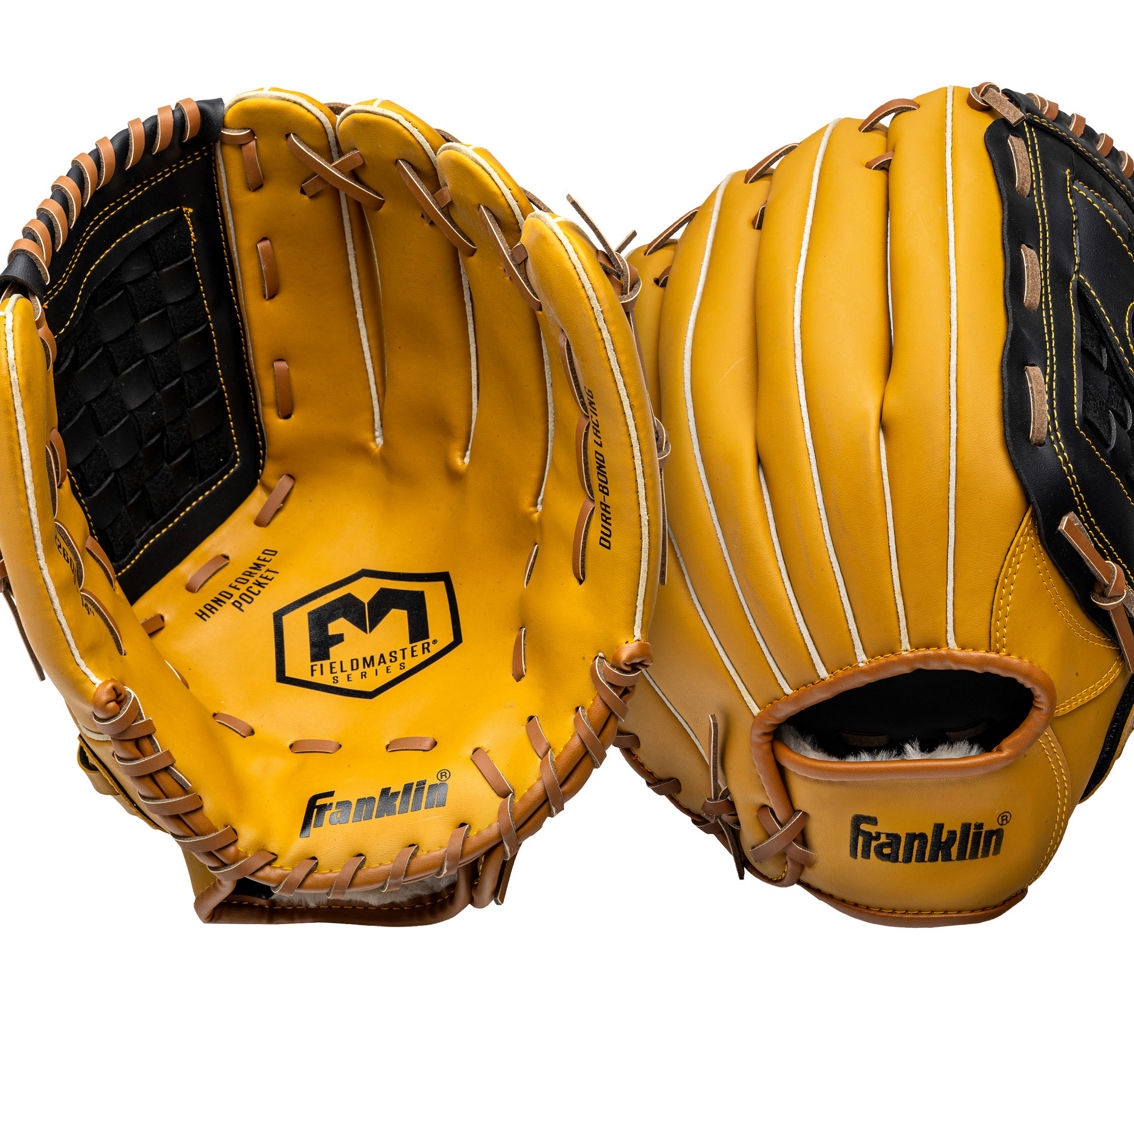 Franklin 14 in. Ultra-Durable Synthetic Leather Field Master Series Baseball Glove - Image 2 of 6